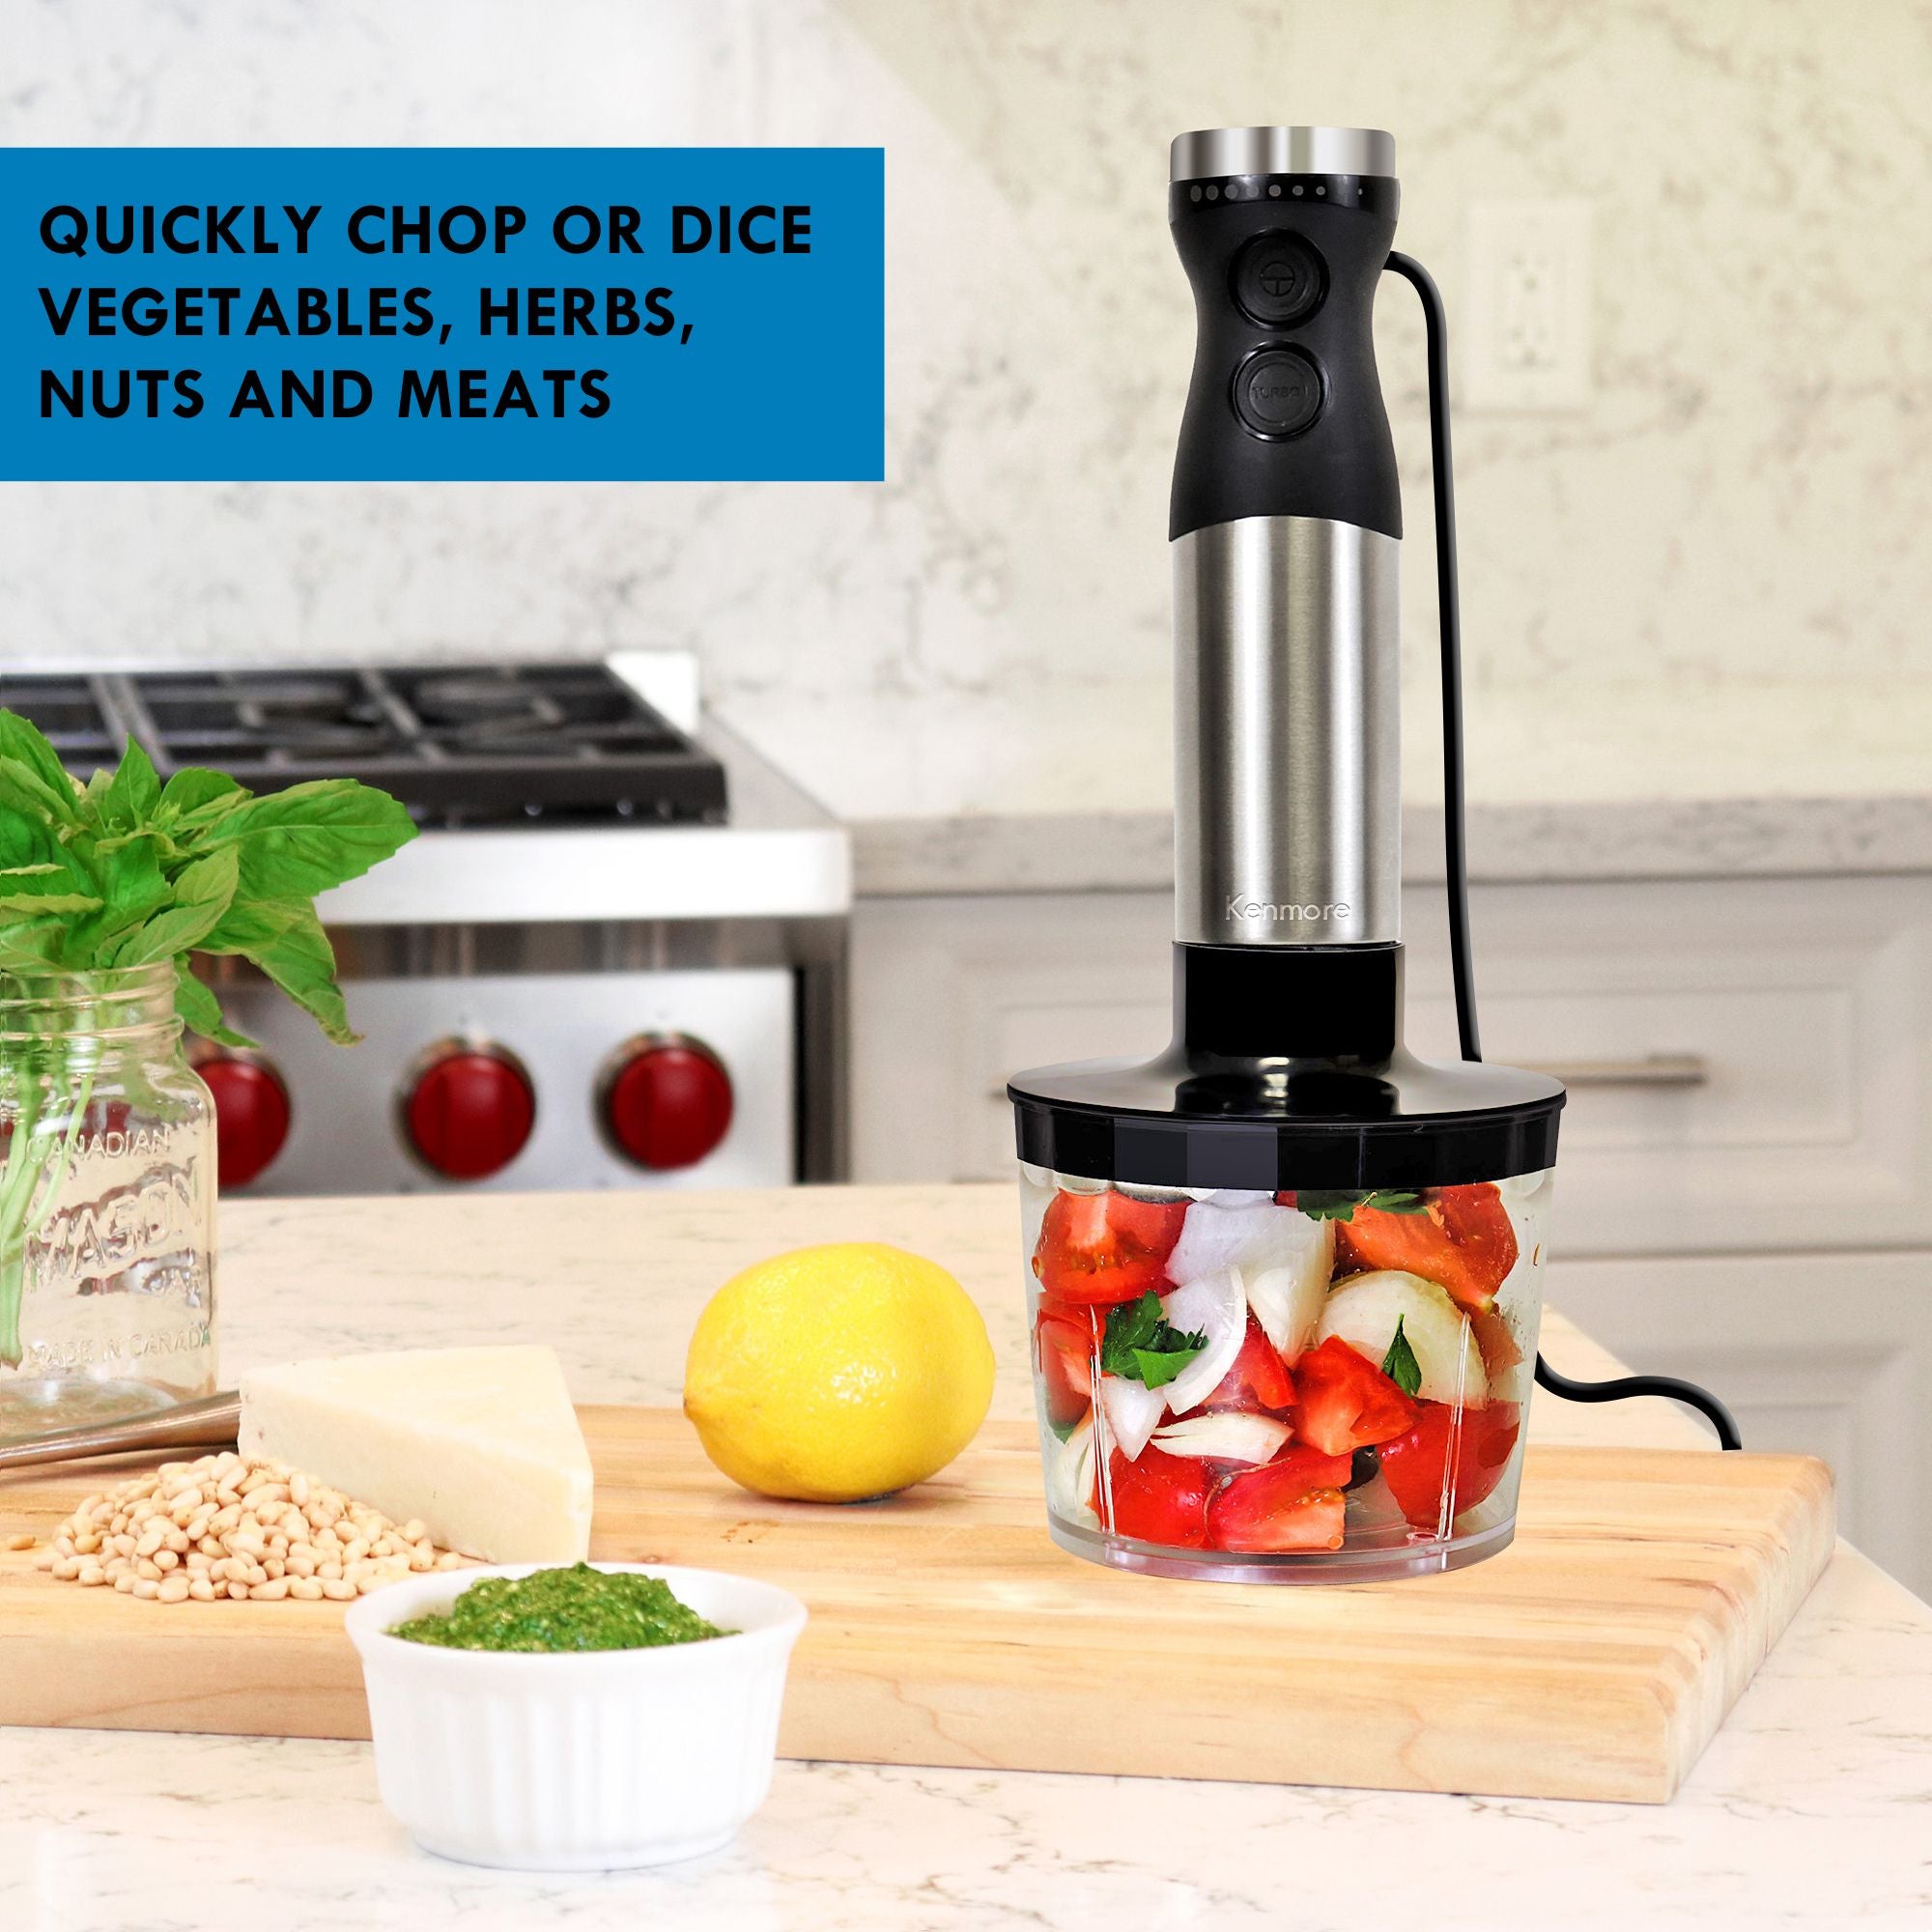 Immersion blender with food chopper attachment filled with cut up peppers, tomatoes, onions, and cilantro on a wooden cutting board with basil, pinenuts, cheese, a lemon, and a small dish of pesto beside it. Text overlay reads, "Quickly chop or dice vegetables, herbs, nuts and meats"